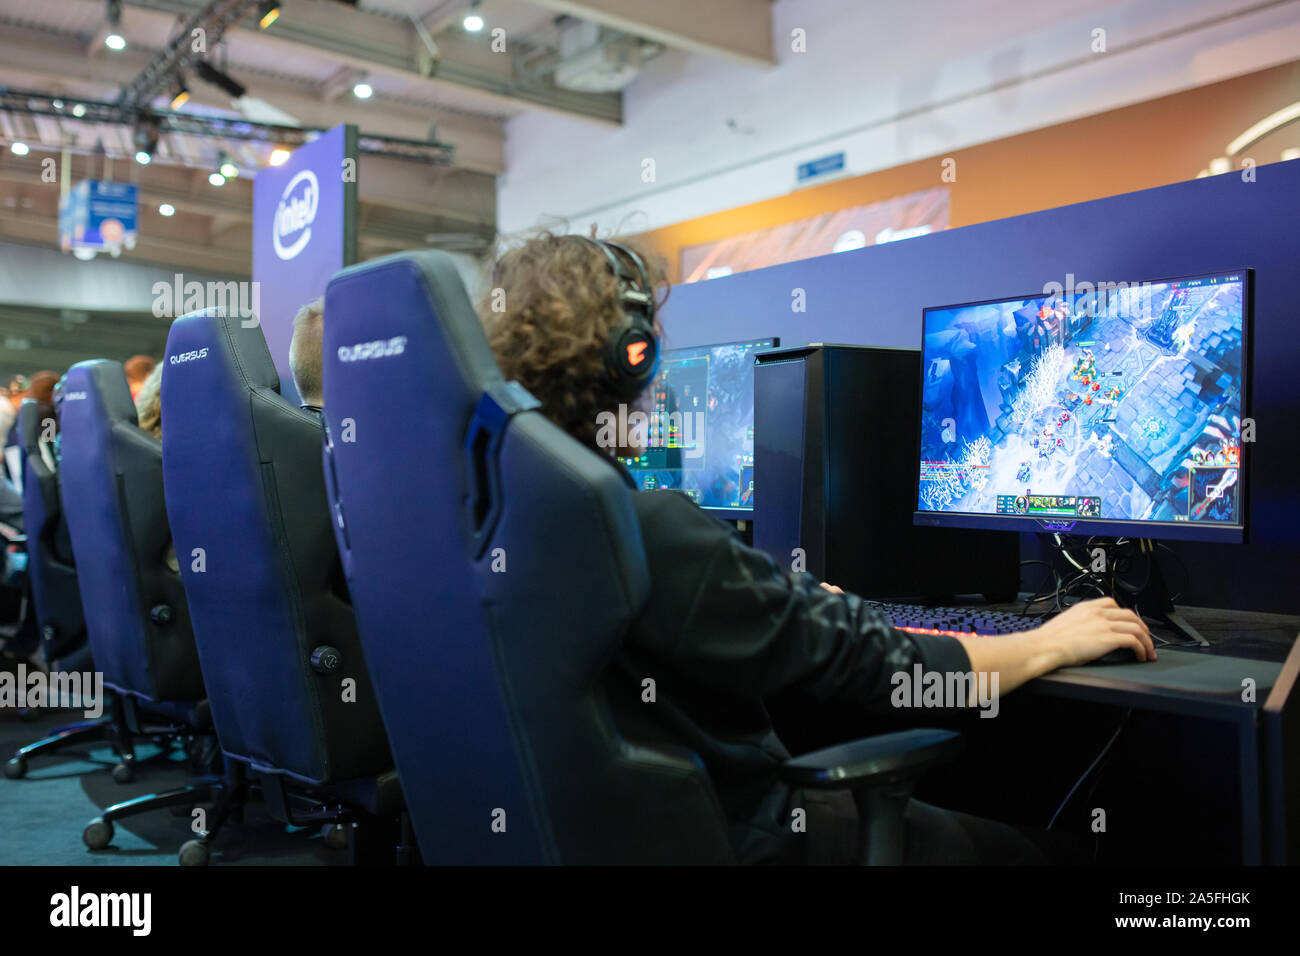 POZNAN, POLAND - October, 18th 2019: People are playing League of Legends at PGA2019. PGA2019 is a computer games and entertainment event organized in Stock Photo